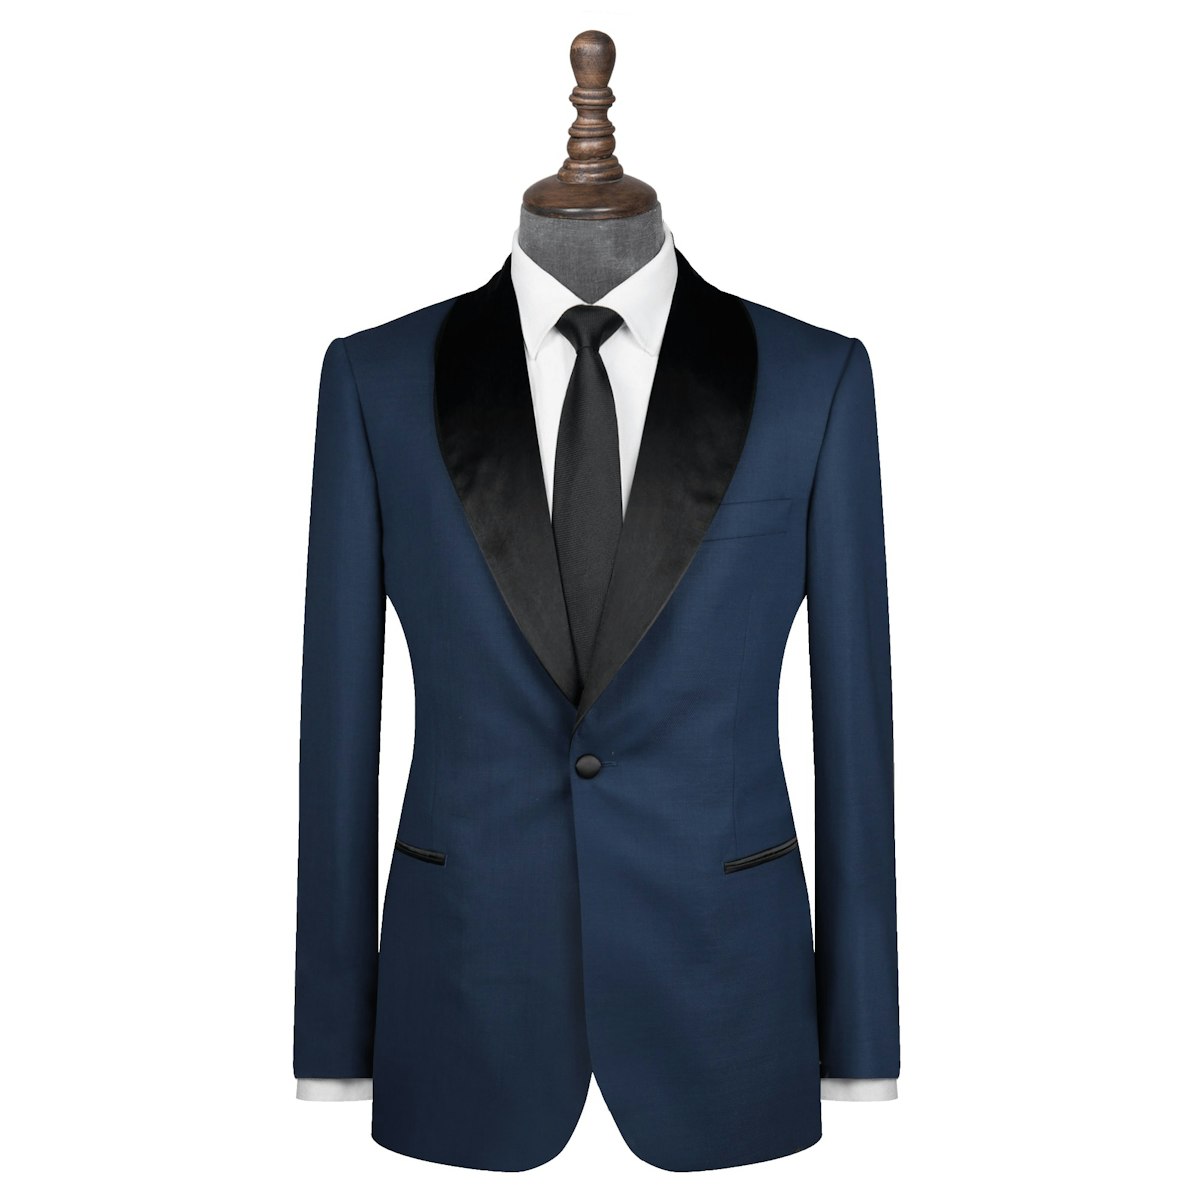 InStitchu Collection The Marlow mens suit